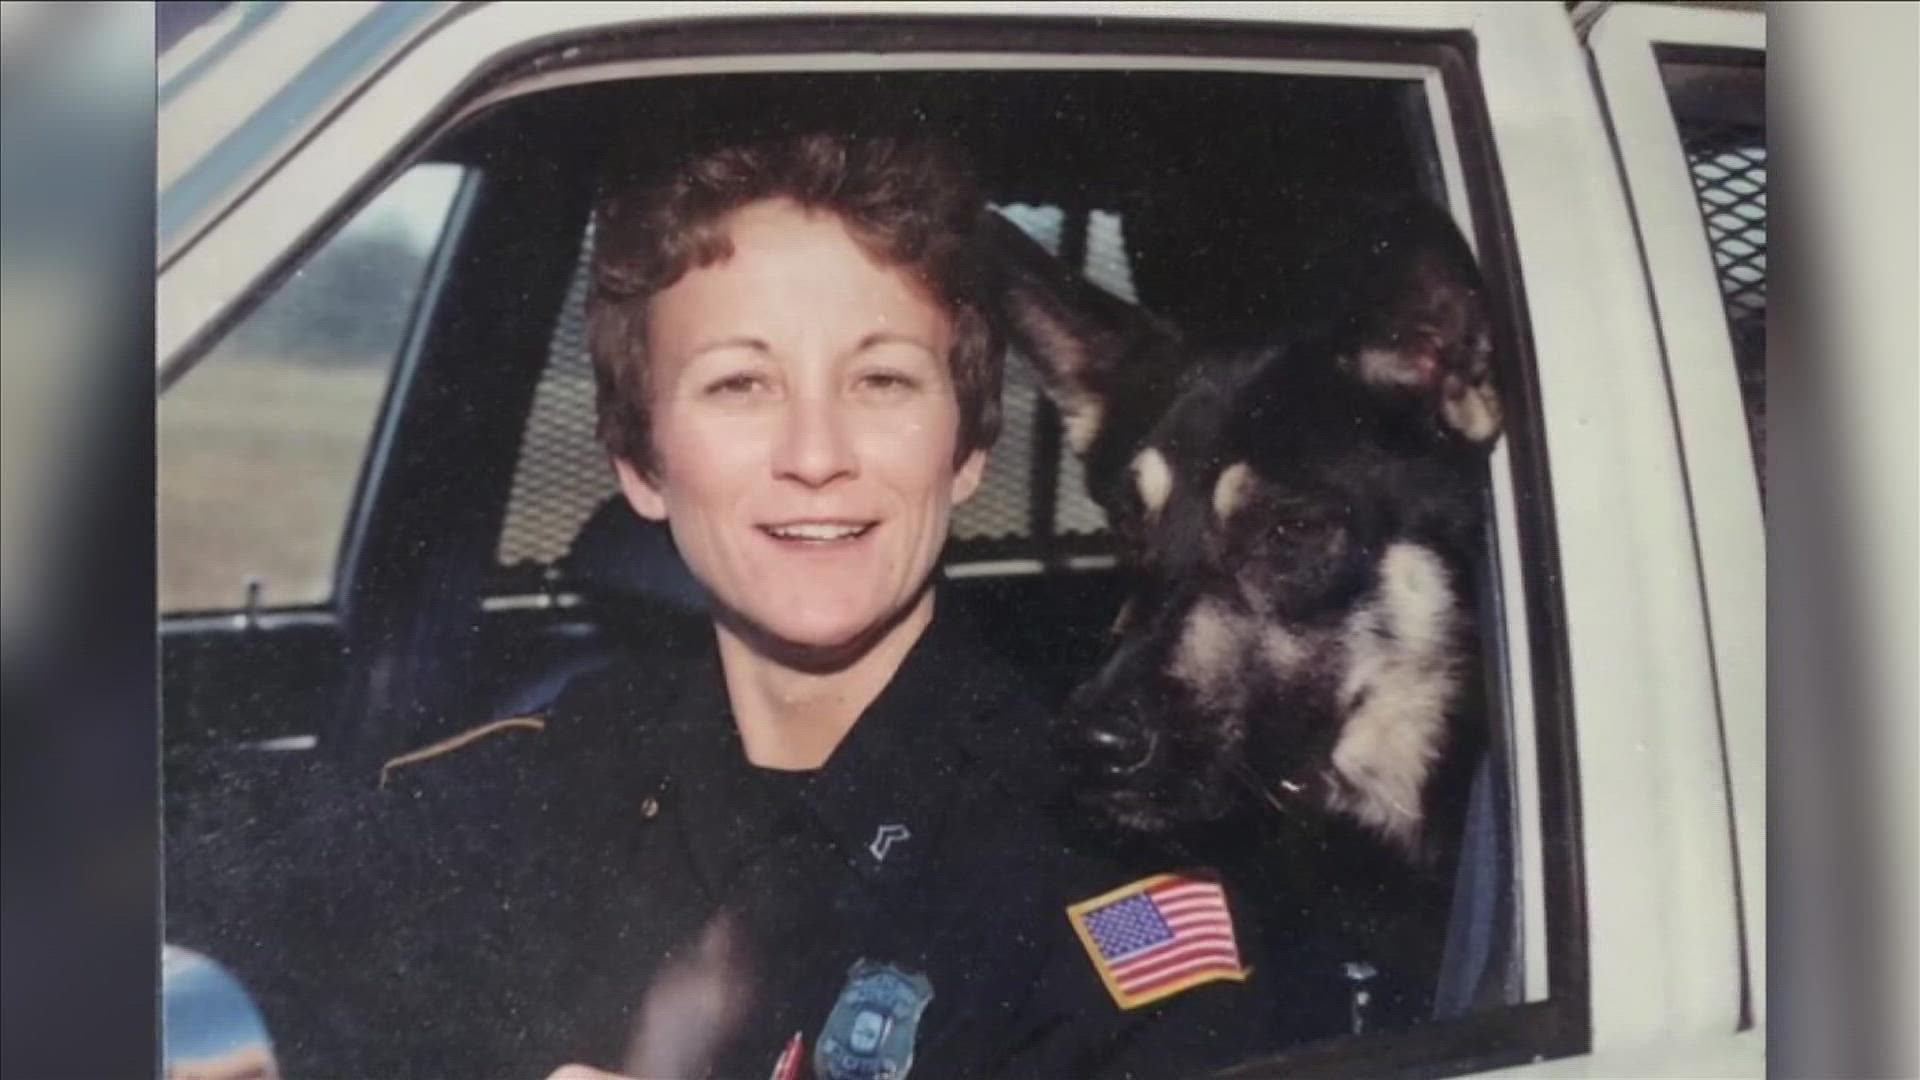 Jane Martin explained that law enforcement was not always in her plans, and she is glad that she gave it a try because it turned out to be very rewarding.